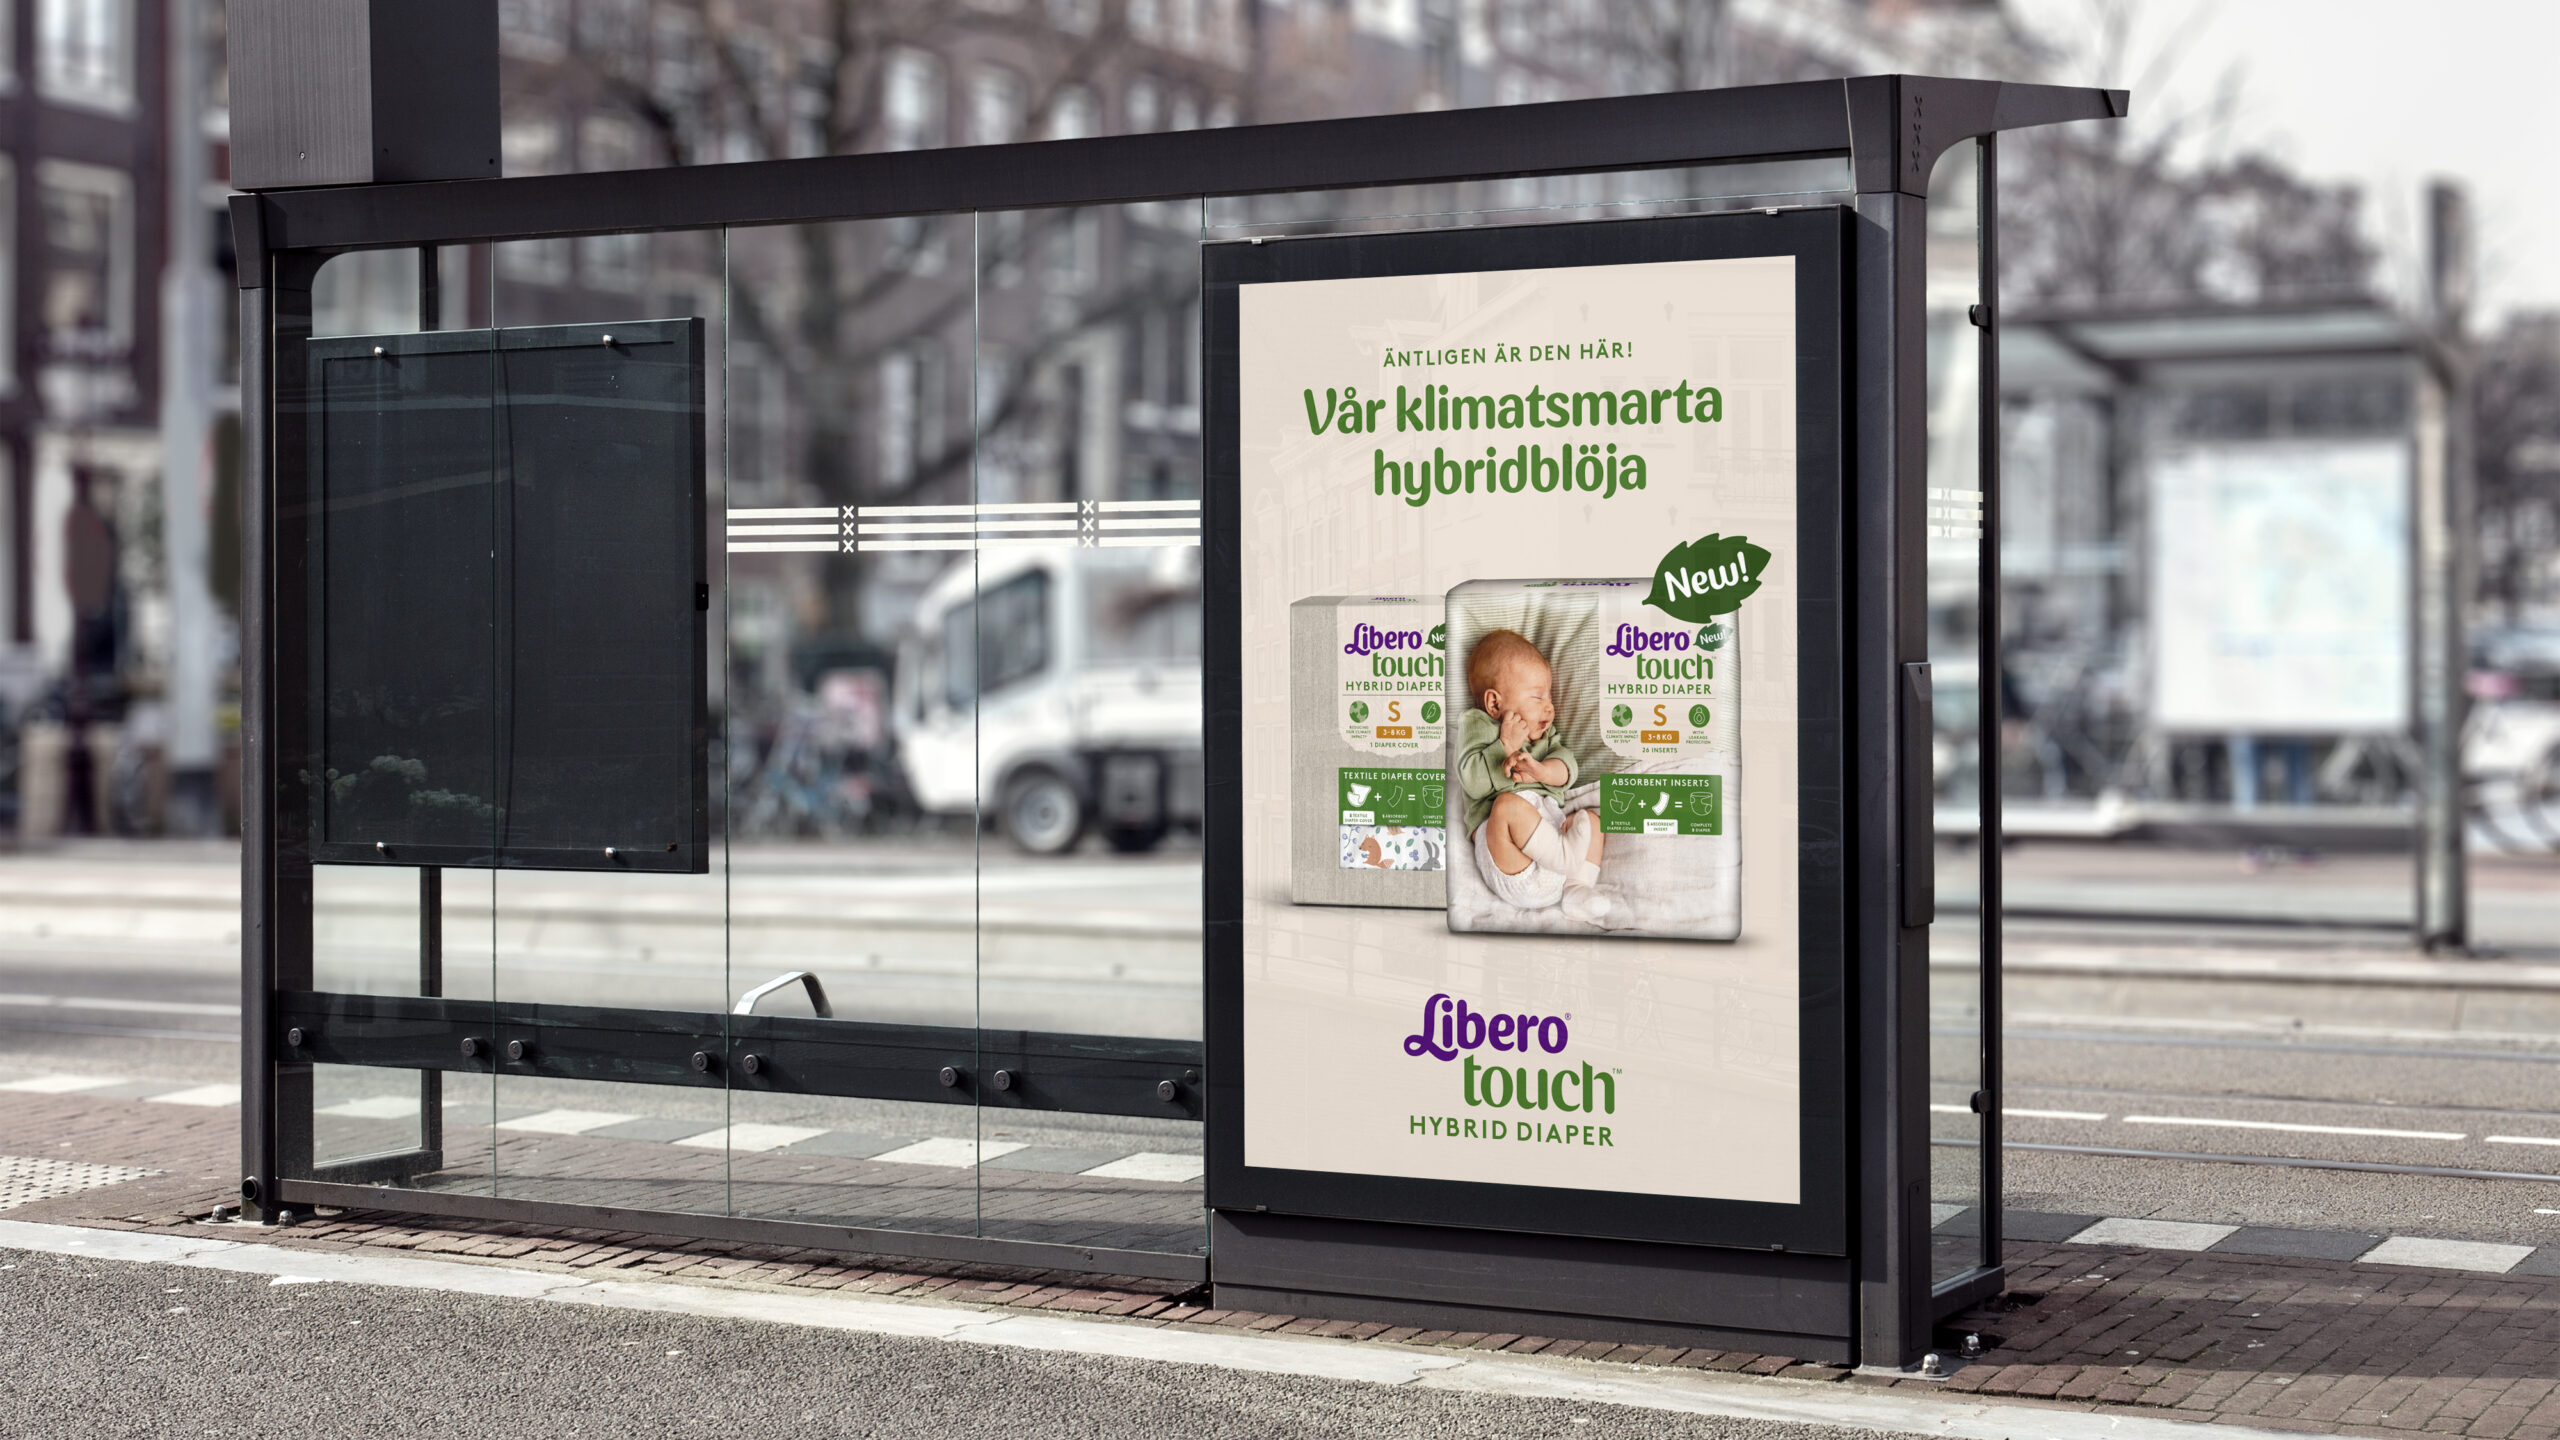 Libero_touch_hybrid_bussstation